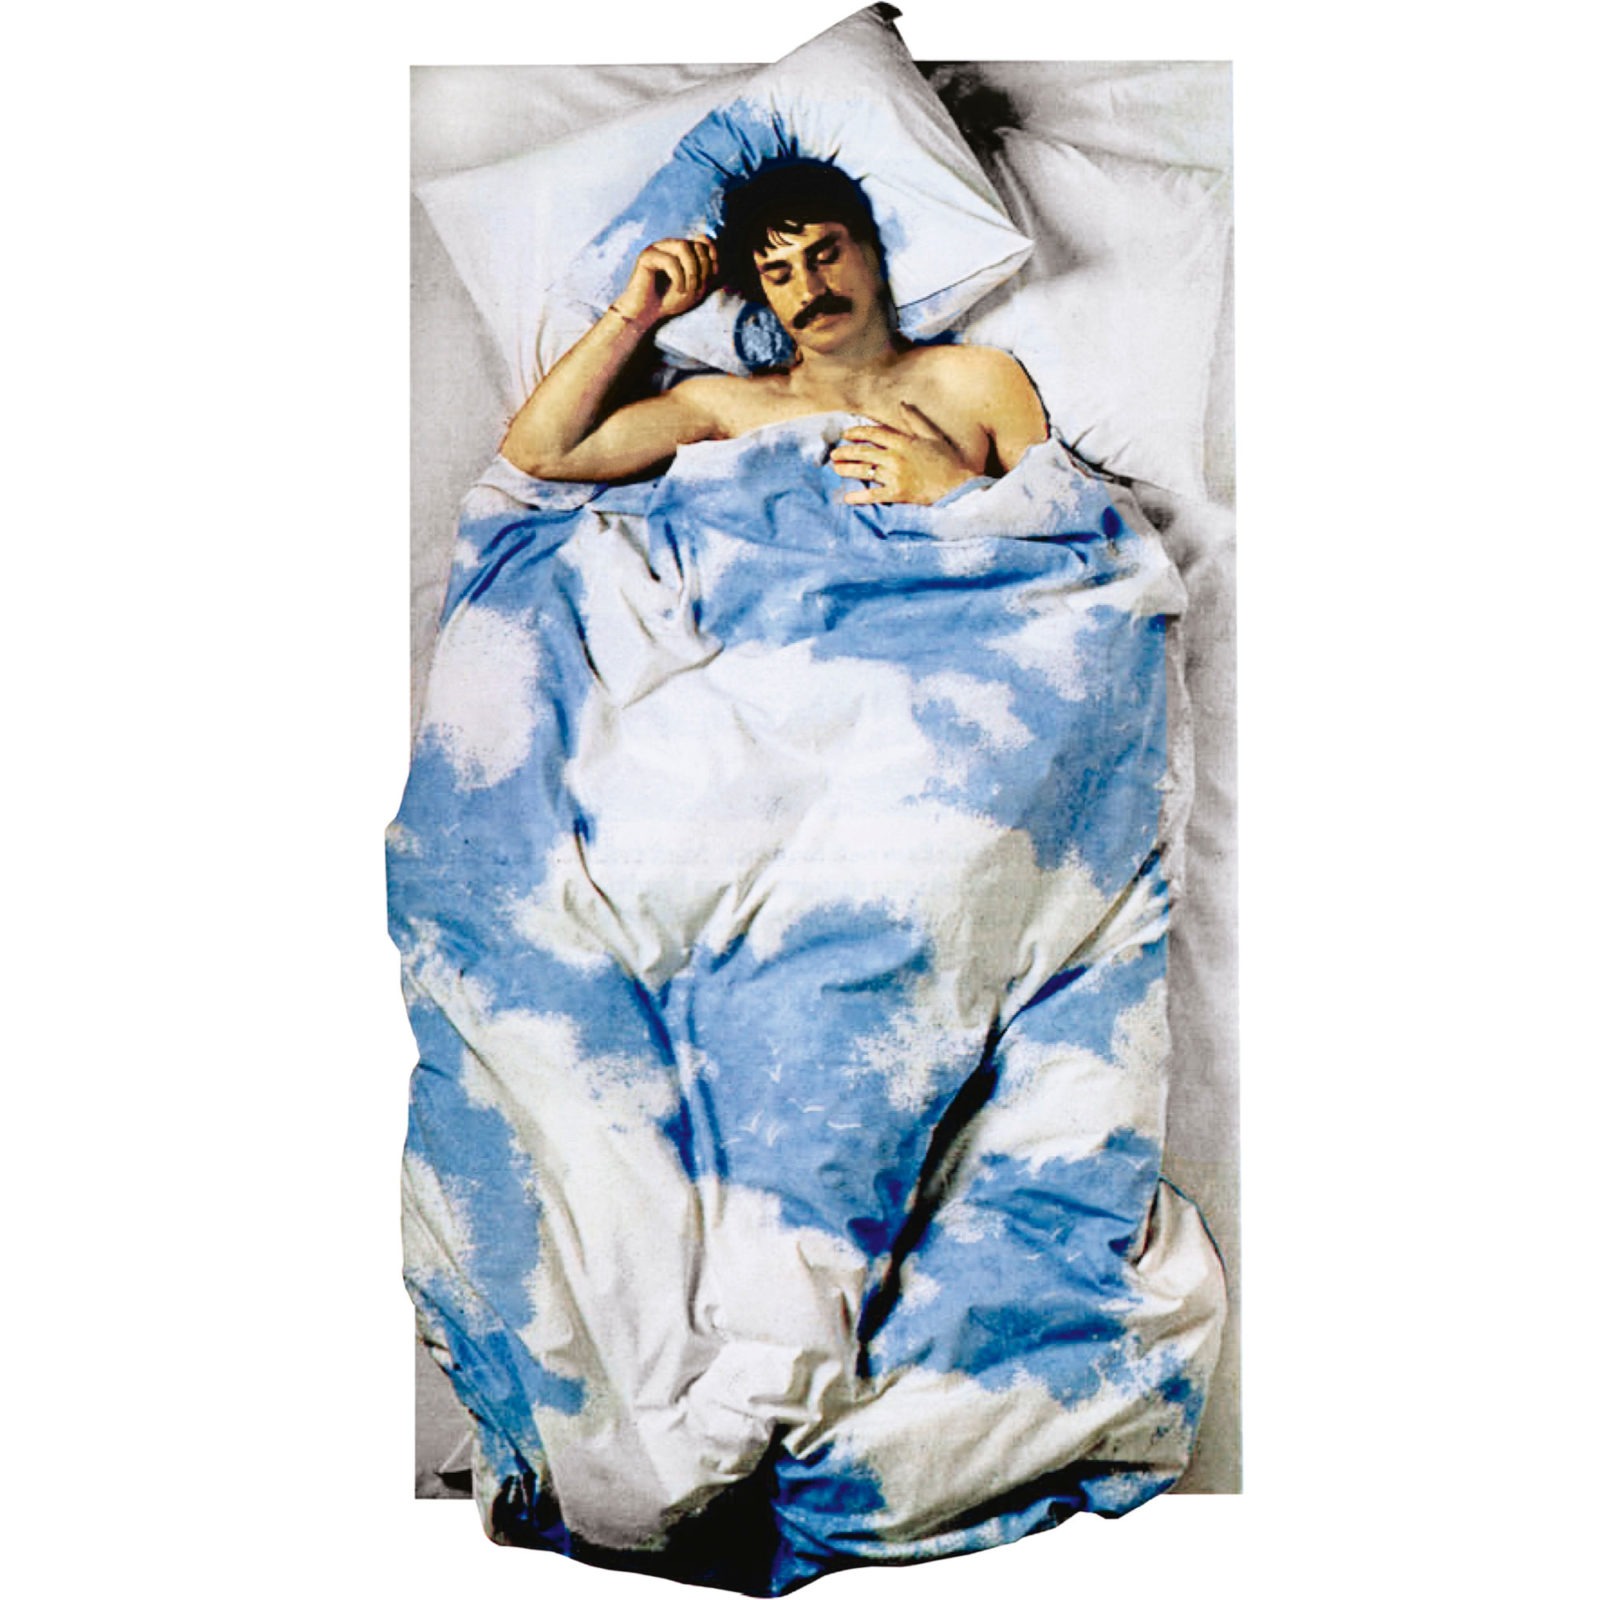 Man seen from above, sleeping in bed under duvet with a pattern showing white clouds on blue sky.